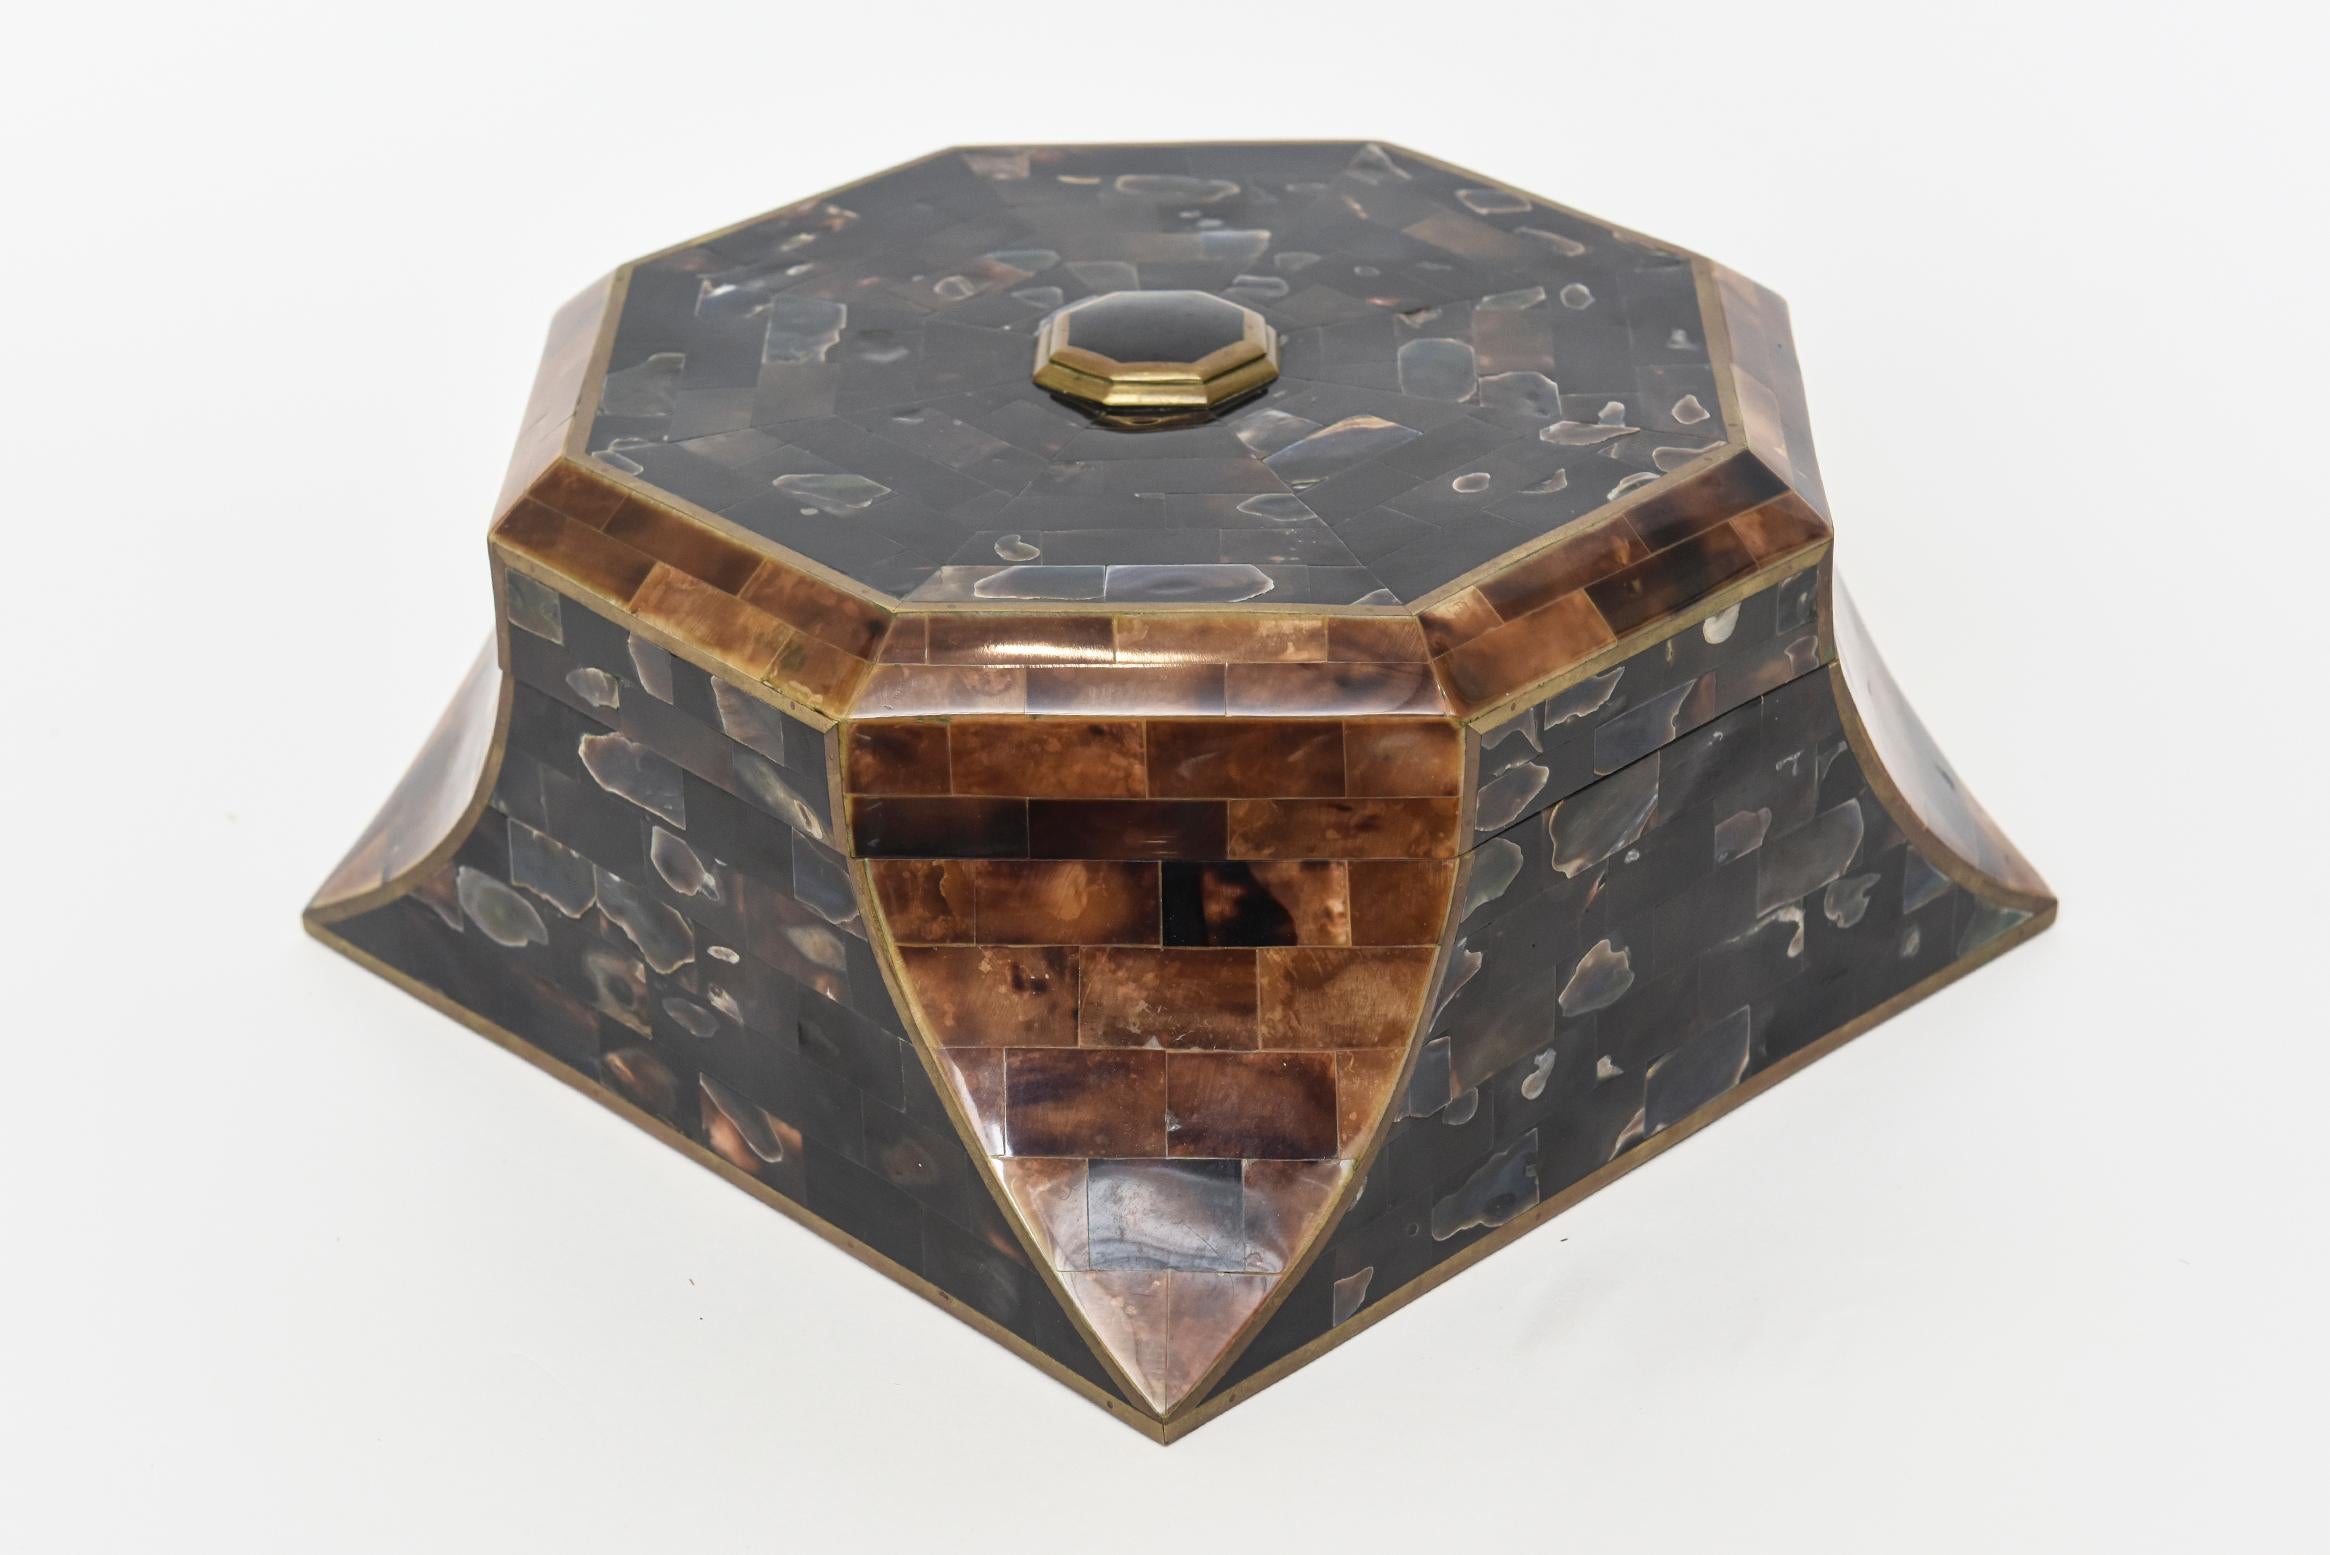 This exquisite and rare vintage Maitland Smith large hinged box box has a beautiful medallion on top of a black stone set into brass. The box is a beautiful combination of horn, abalone and a wood interior. The inside of the box is as was found and